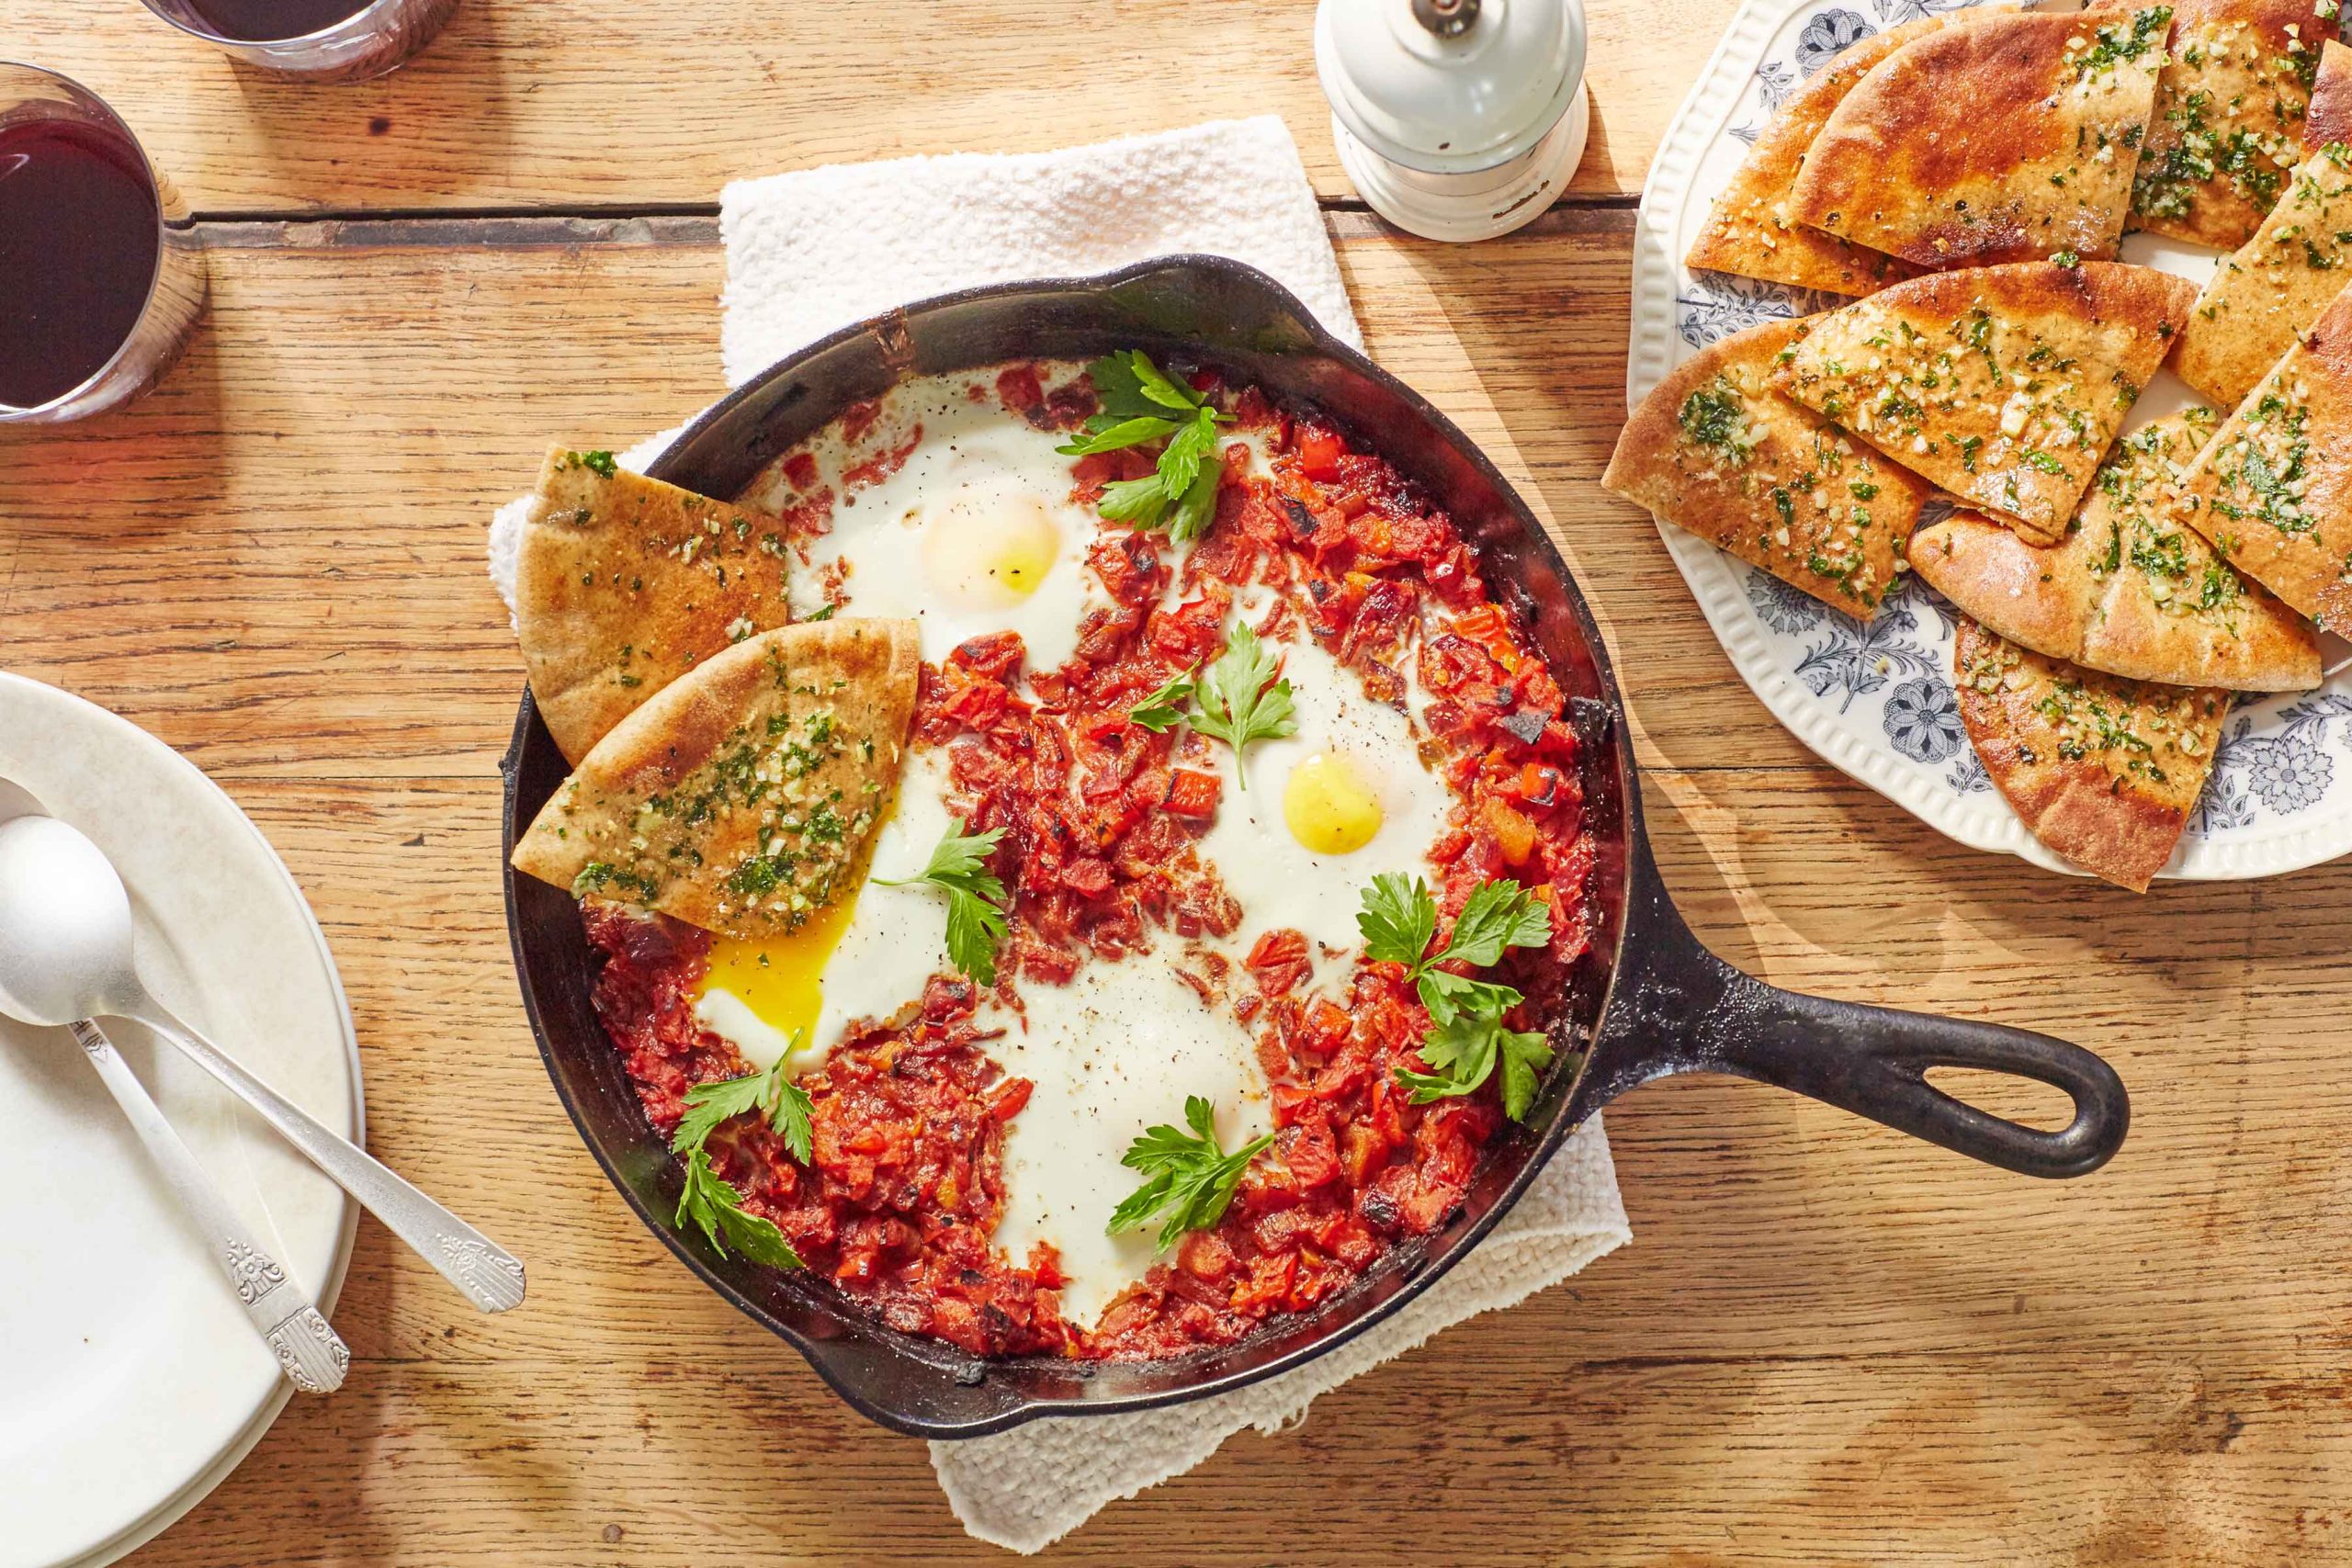 Shakshuka, a Middle Eastern tomato and egg dish, baked in a cast iron skillet with a plate of toasted pita cut in triangles and topped with herbs on the side